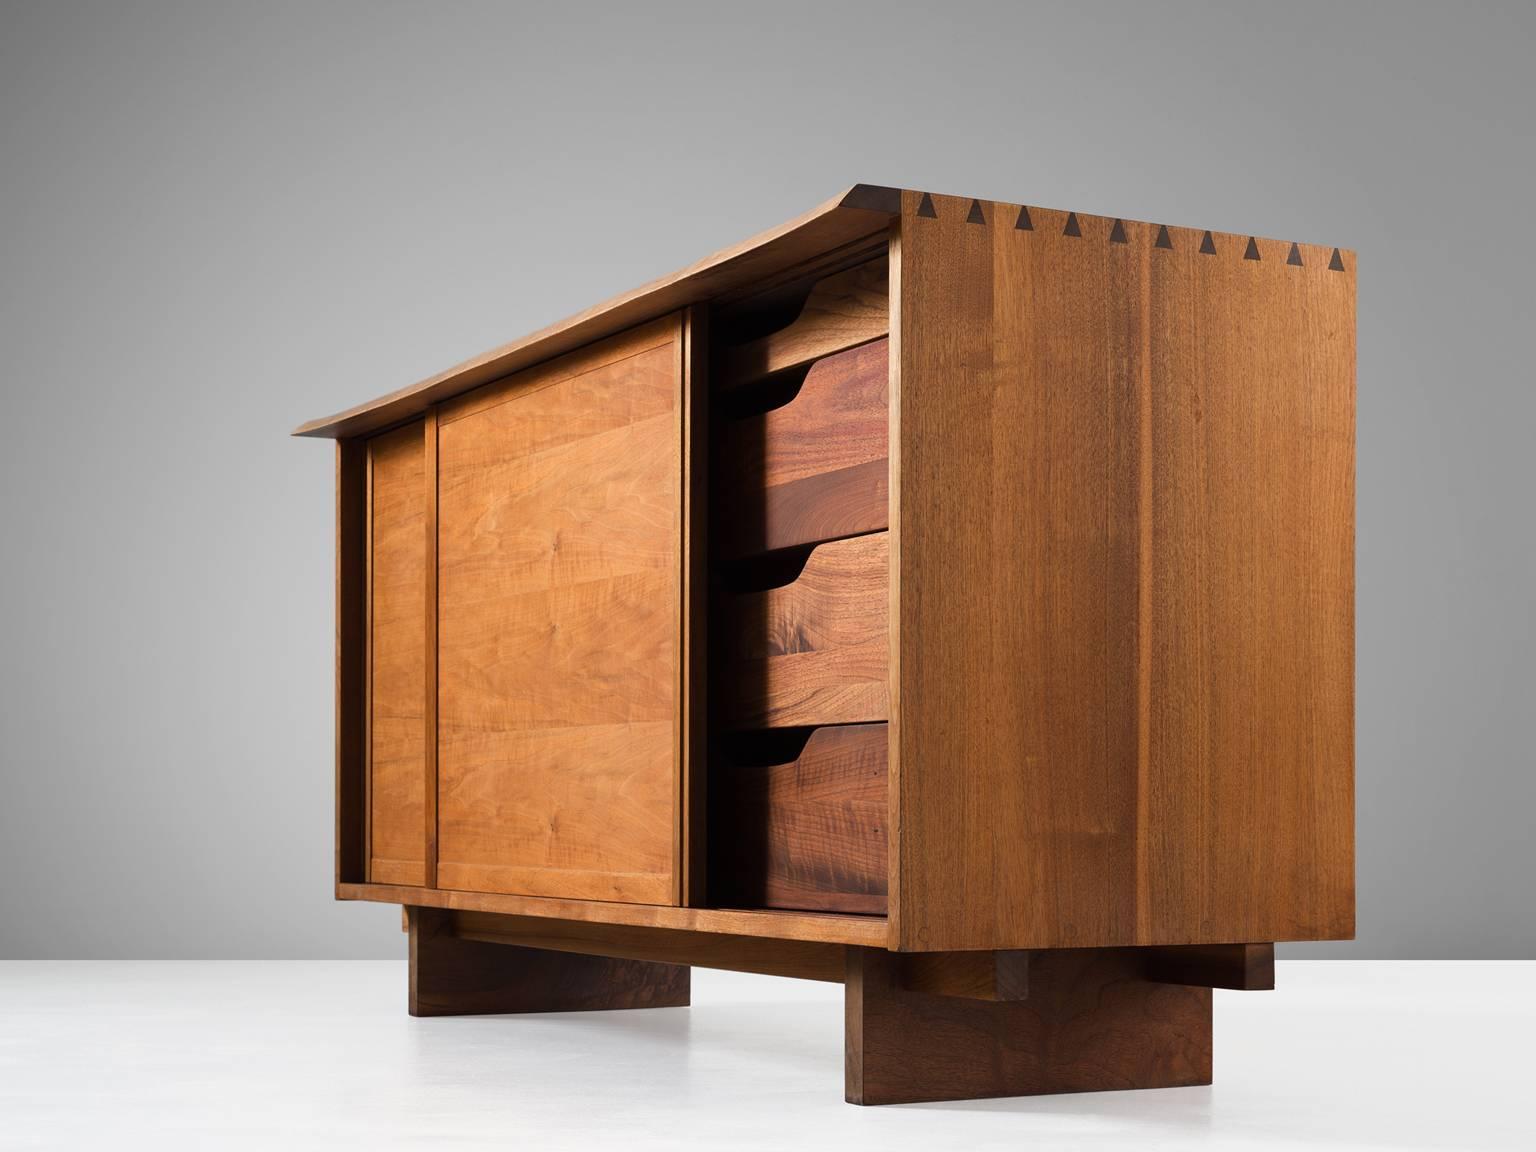 Sideboard in walnut by George Nakashima, United States, circa 1955. 

Cabinet with two sliding doors, executed in walnut with traditional dovetail wood-joints. As a trademark of Nakashima this piece is signed with the client's name on the back of